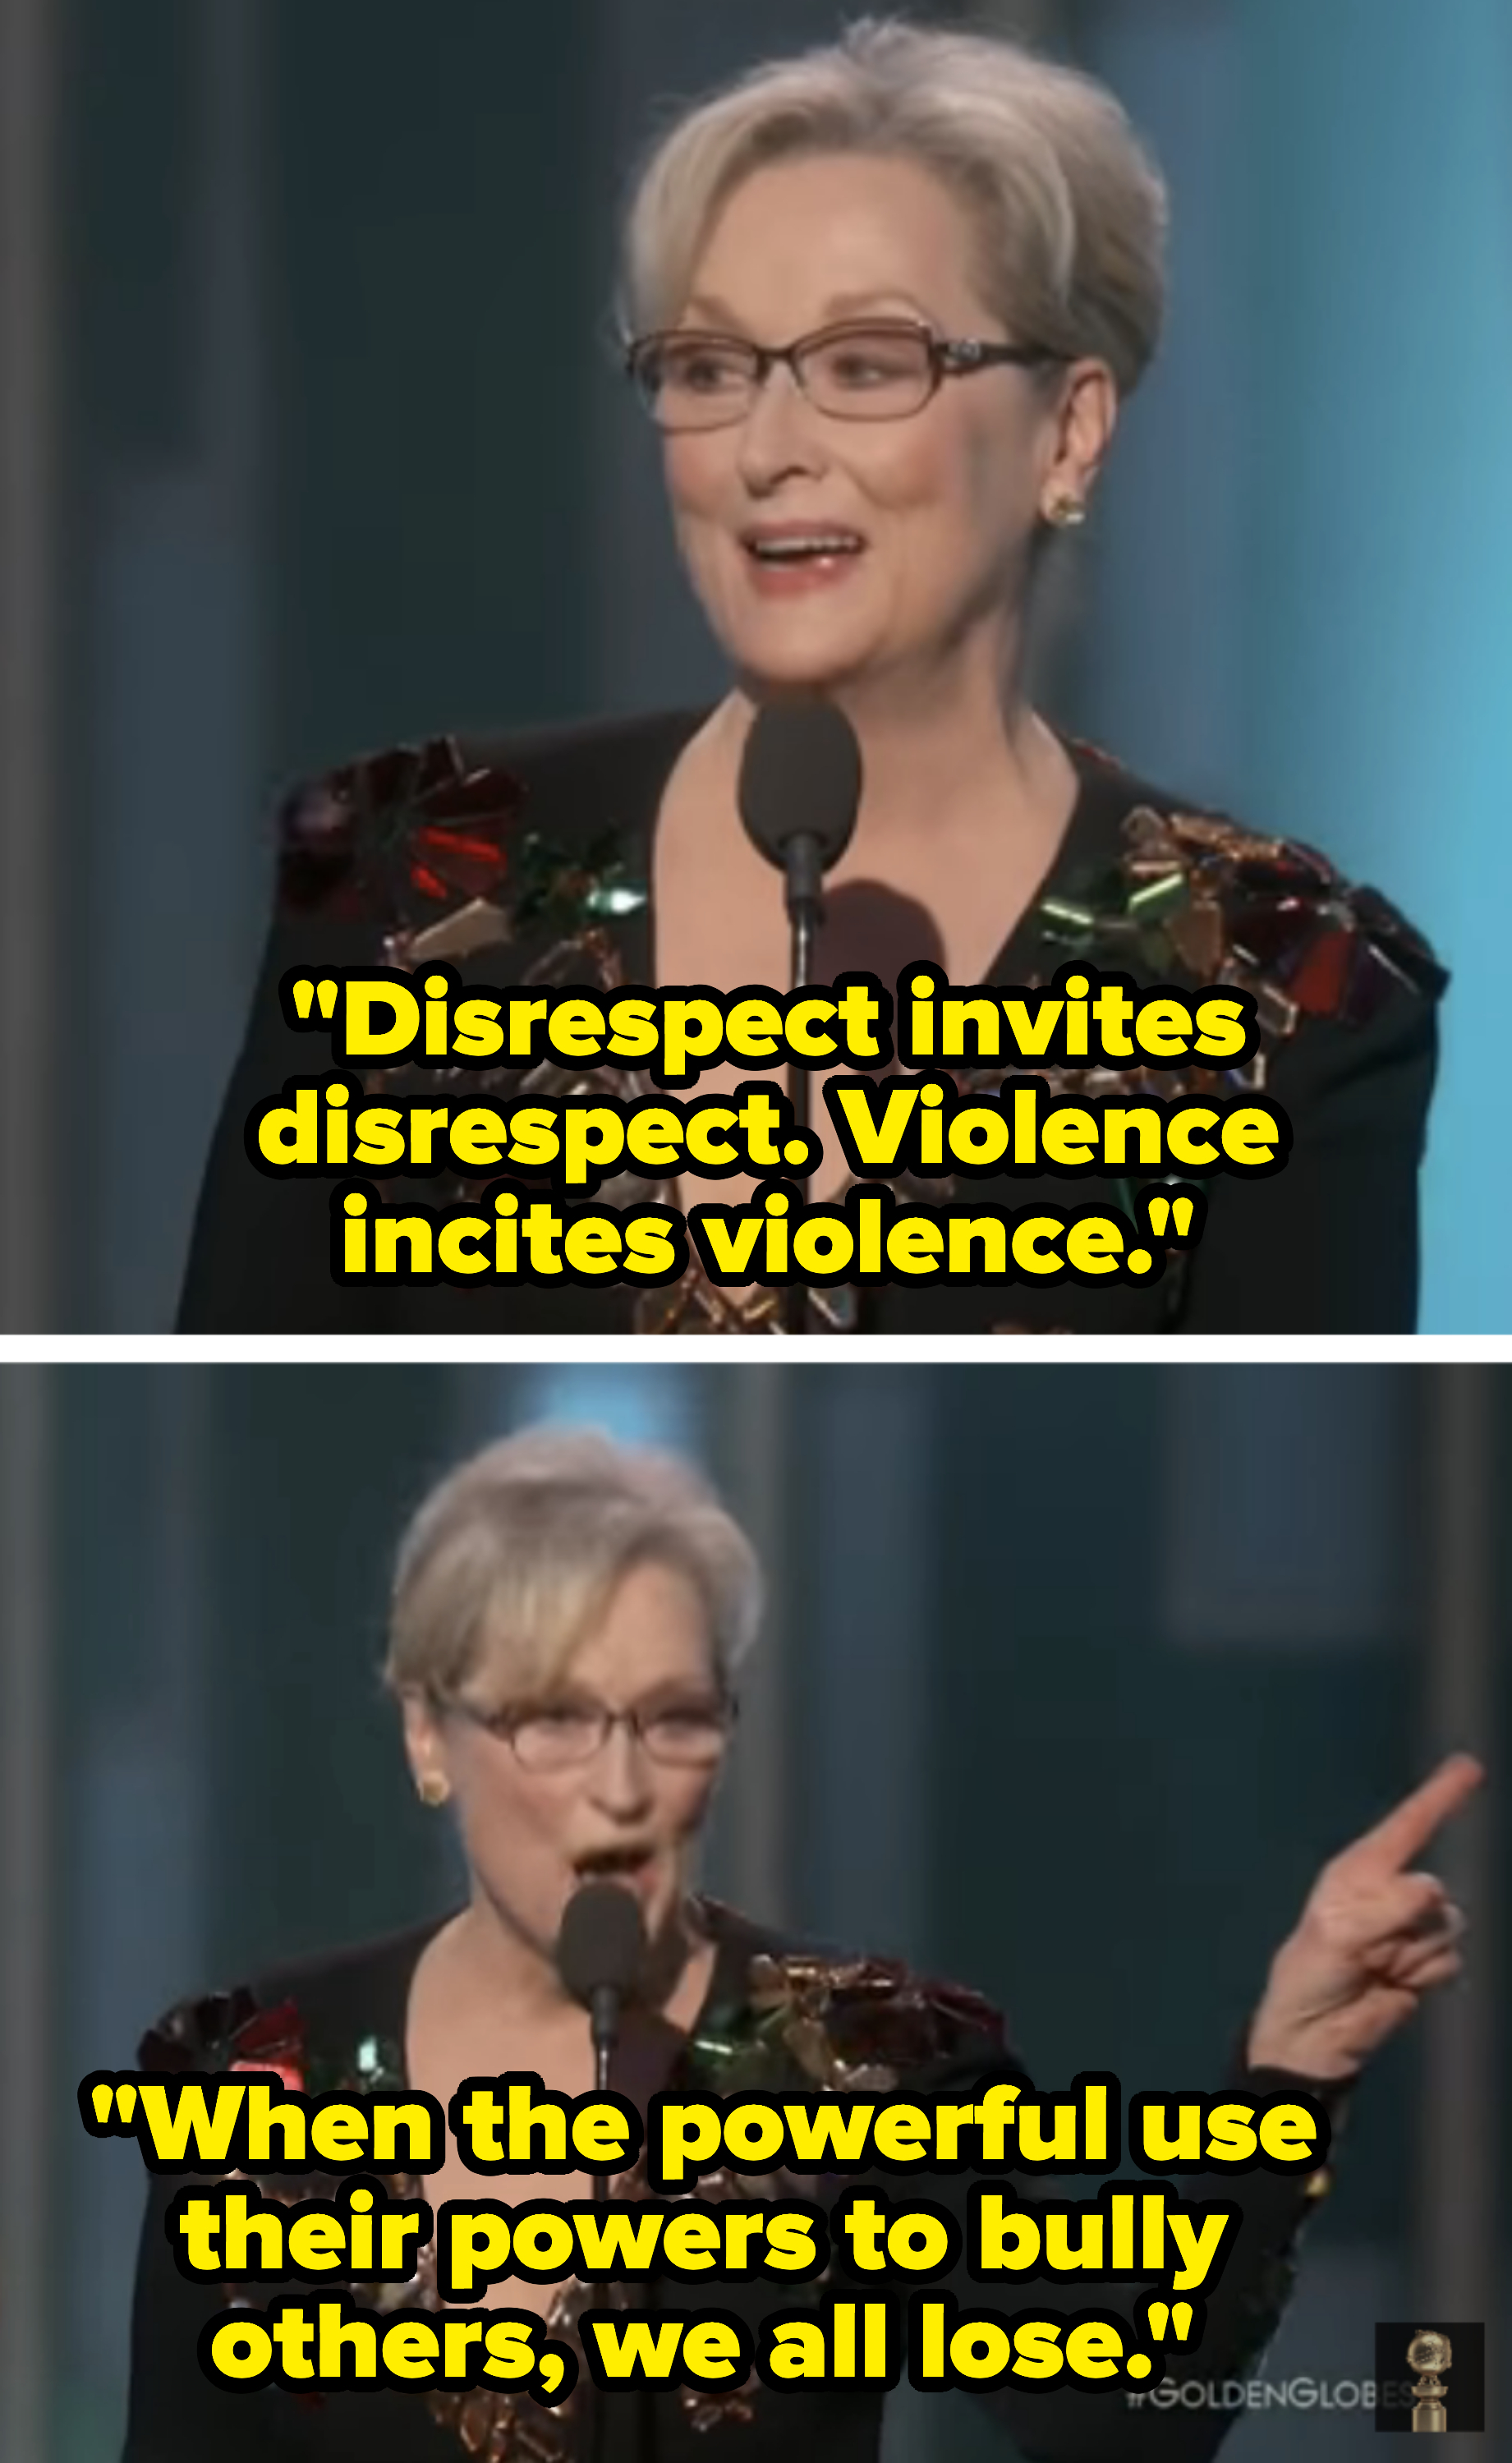 meryl on stage saying, when the powerful use their powers to bully others, we all lose